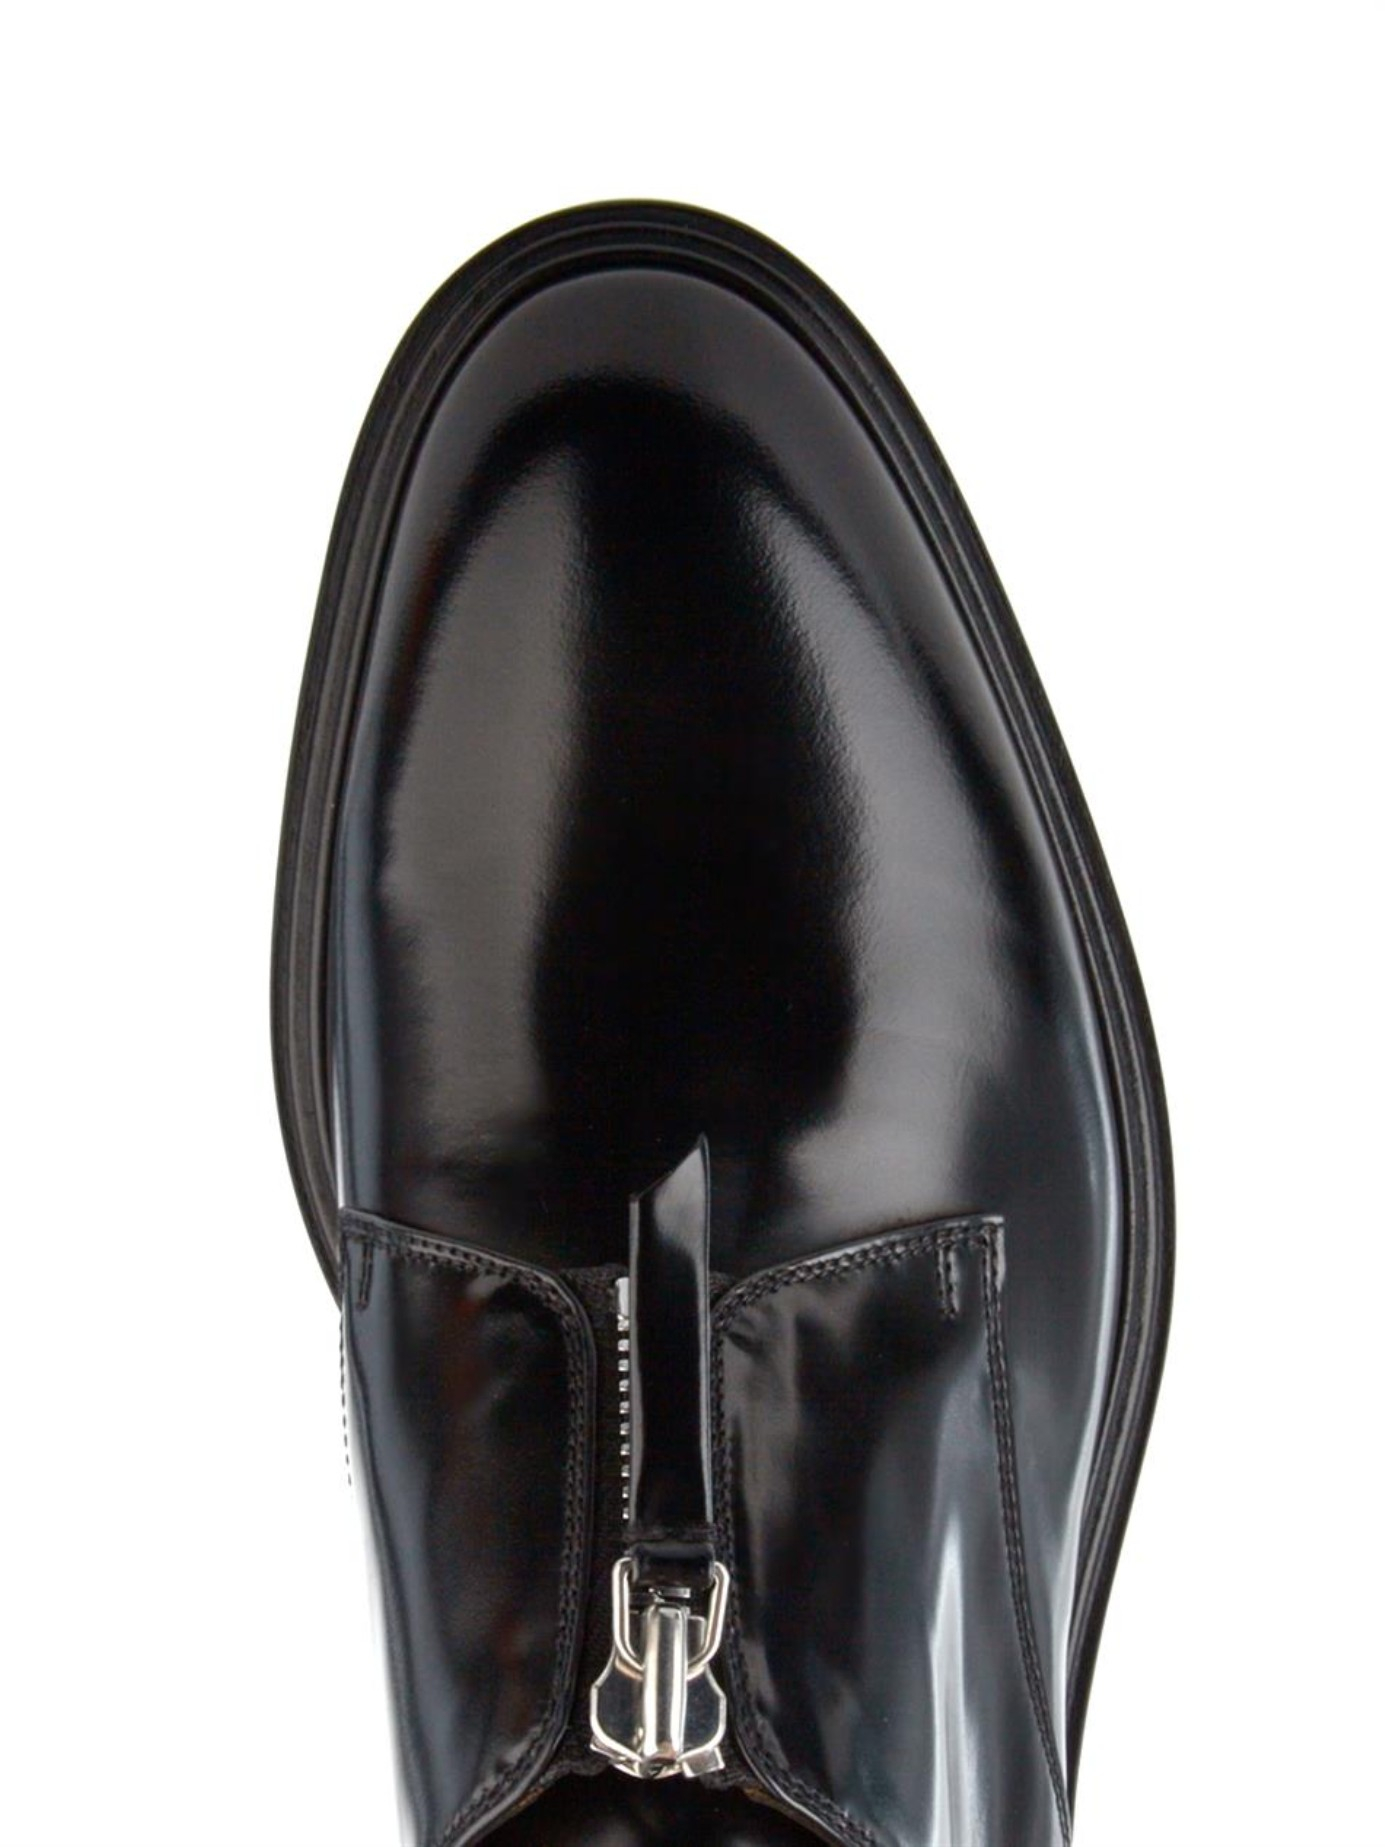 Givenchy Zip-Up Leather Derby Shoes in Black for Men | Lyst